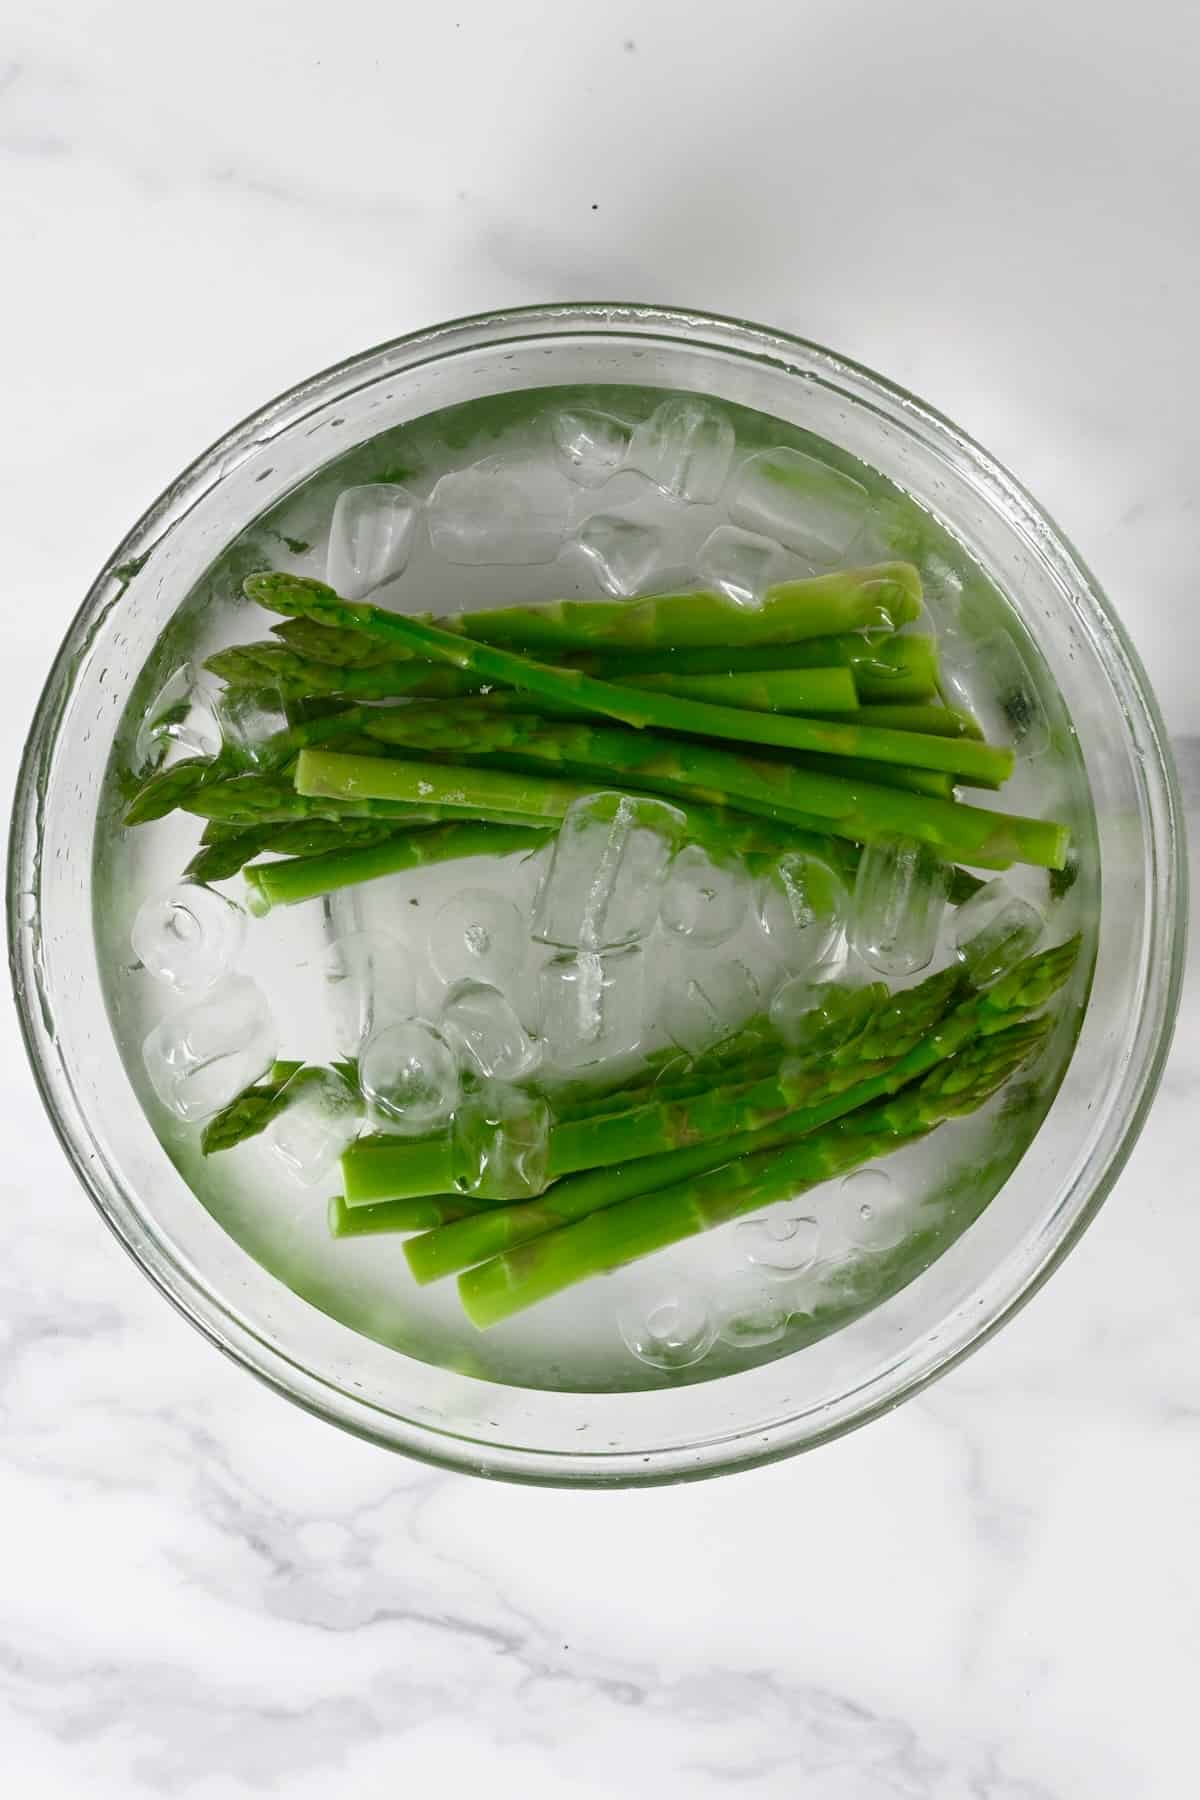 Icing asparagus after blanching